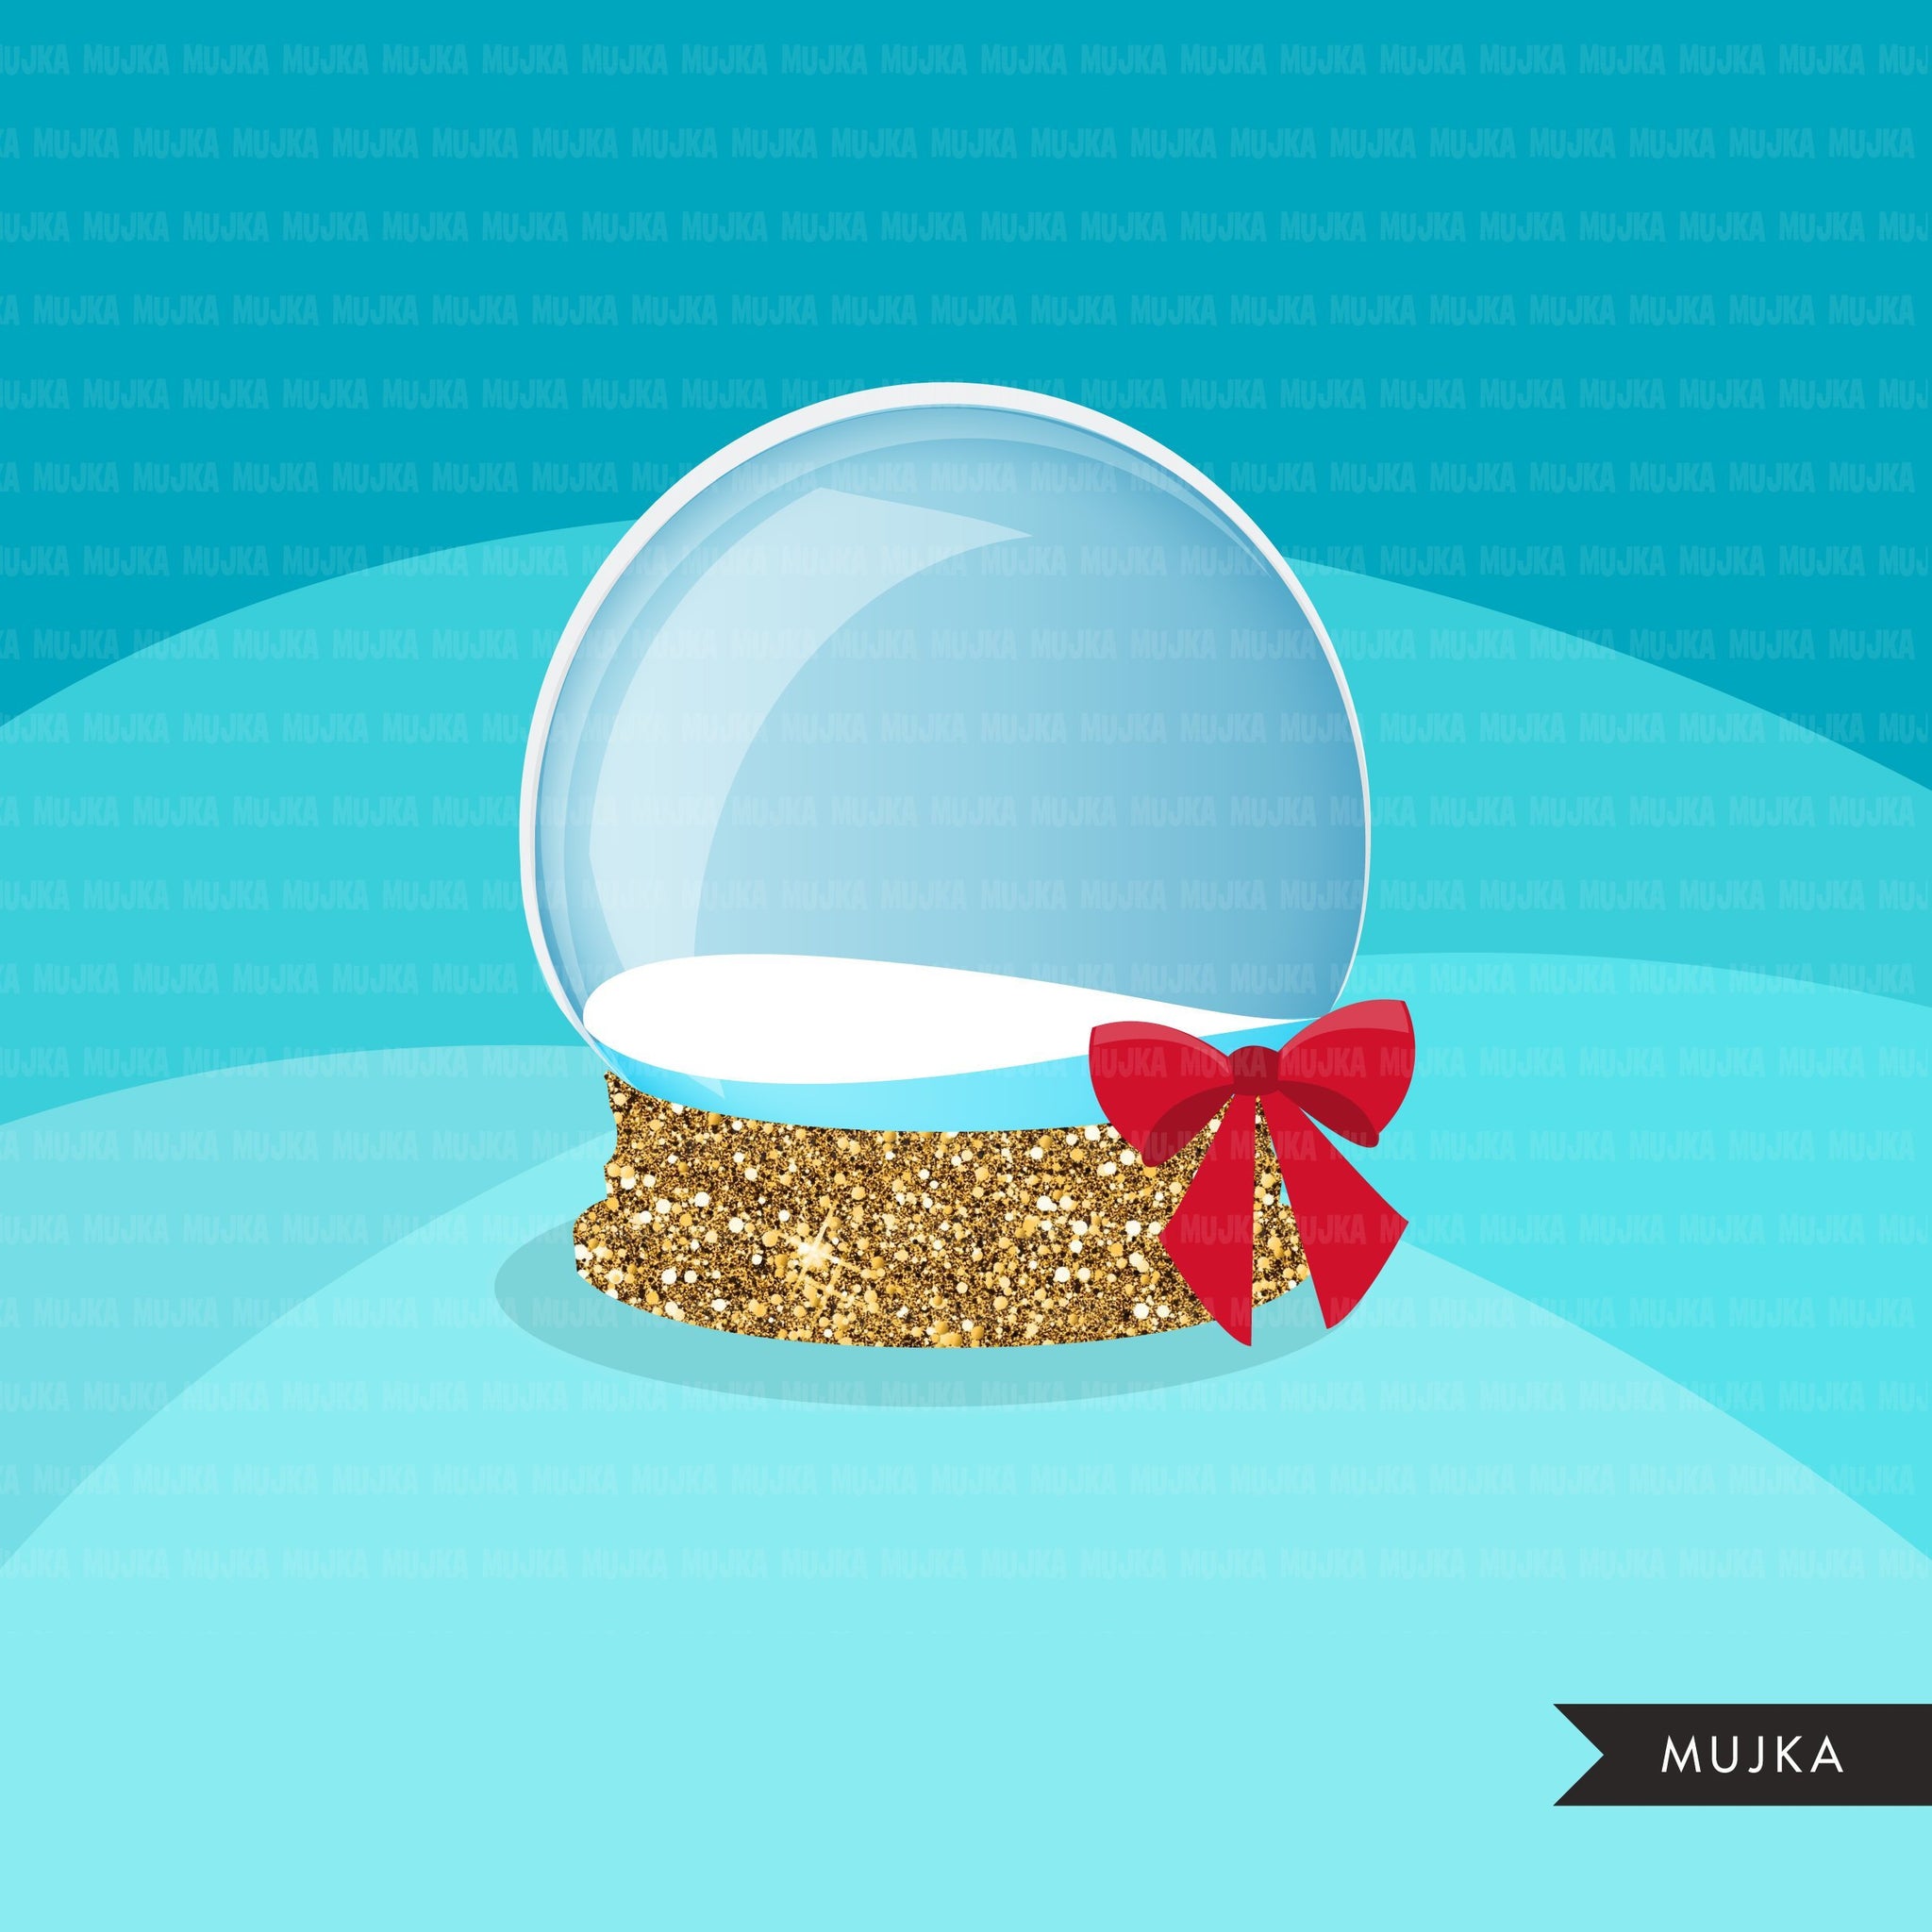 Christmas snow globe clipart winter, snow globe creator, make your own graphic